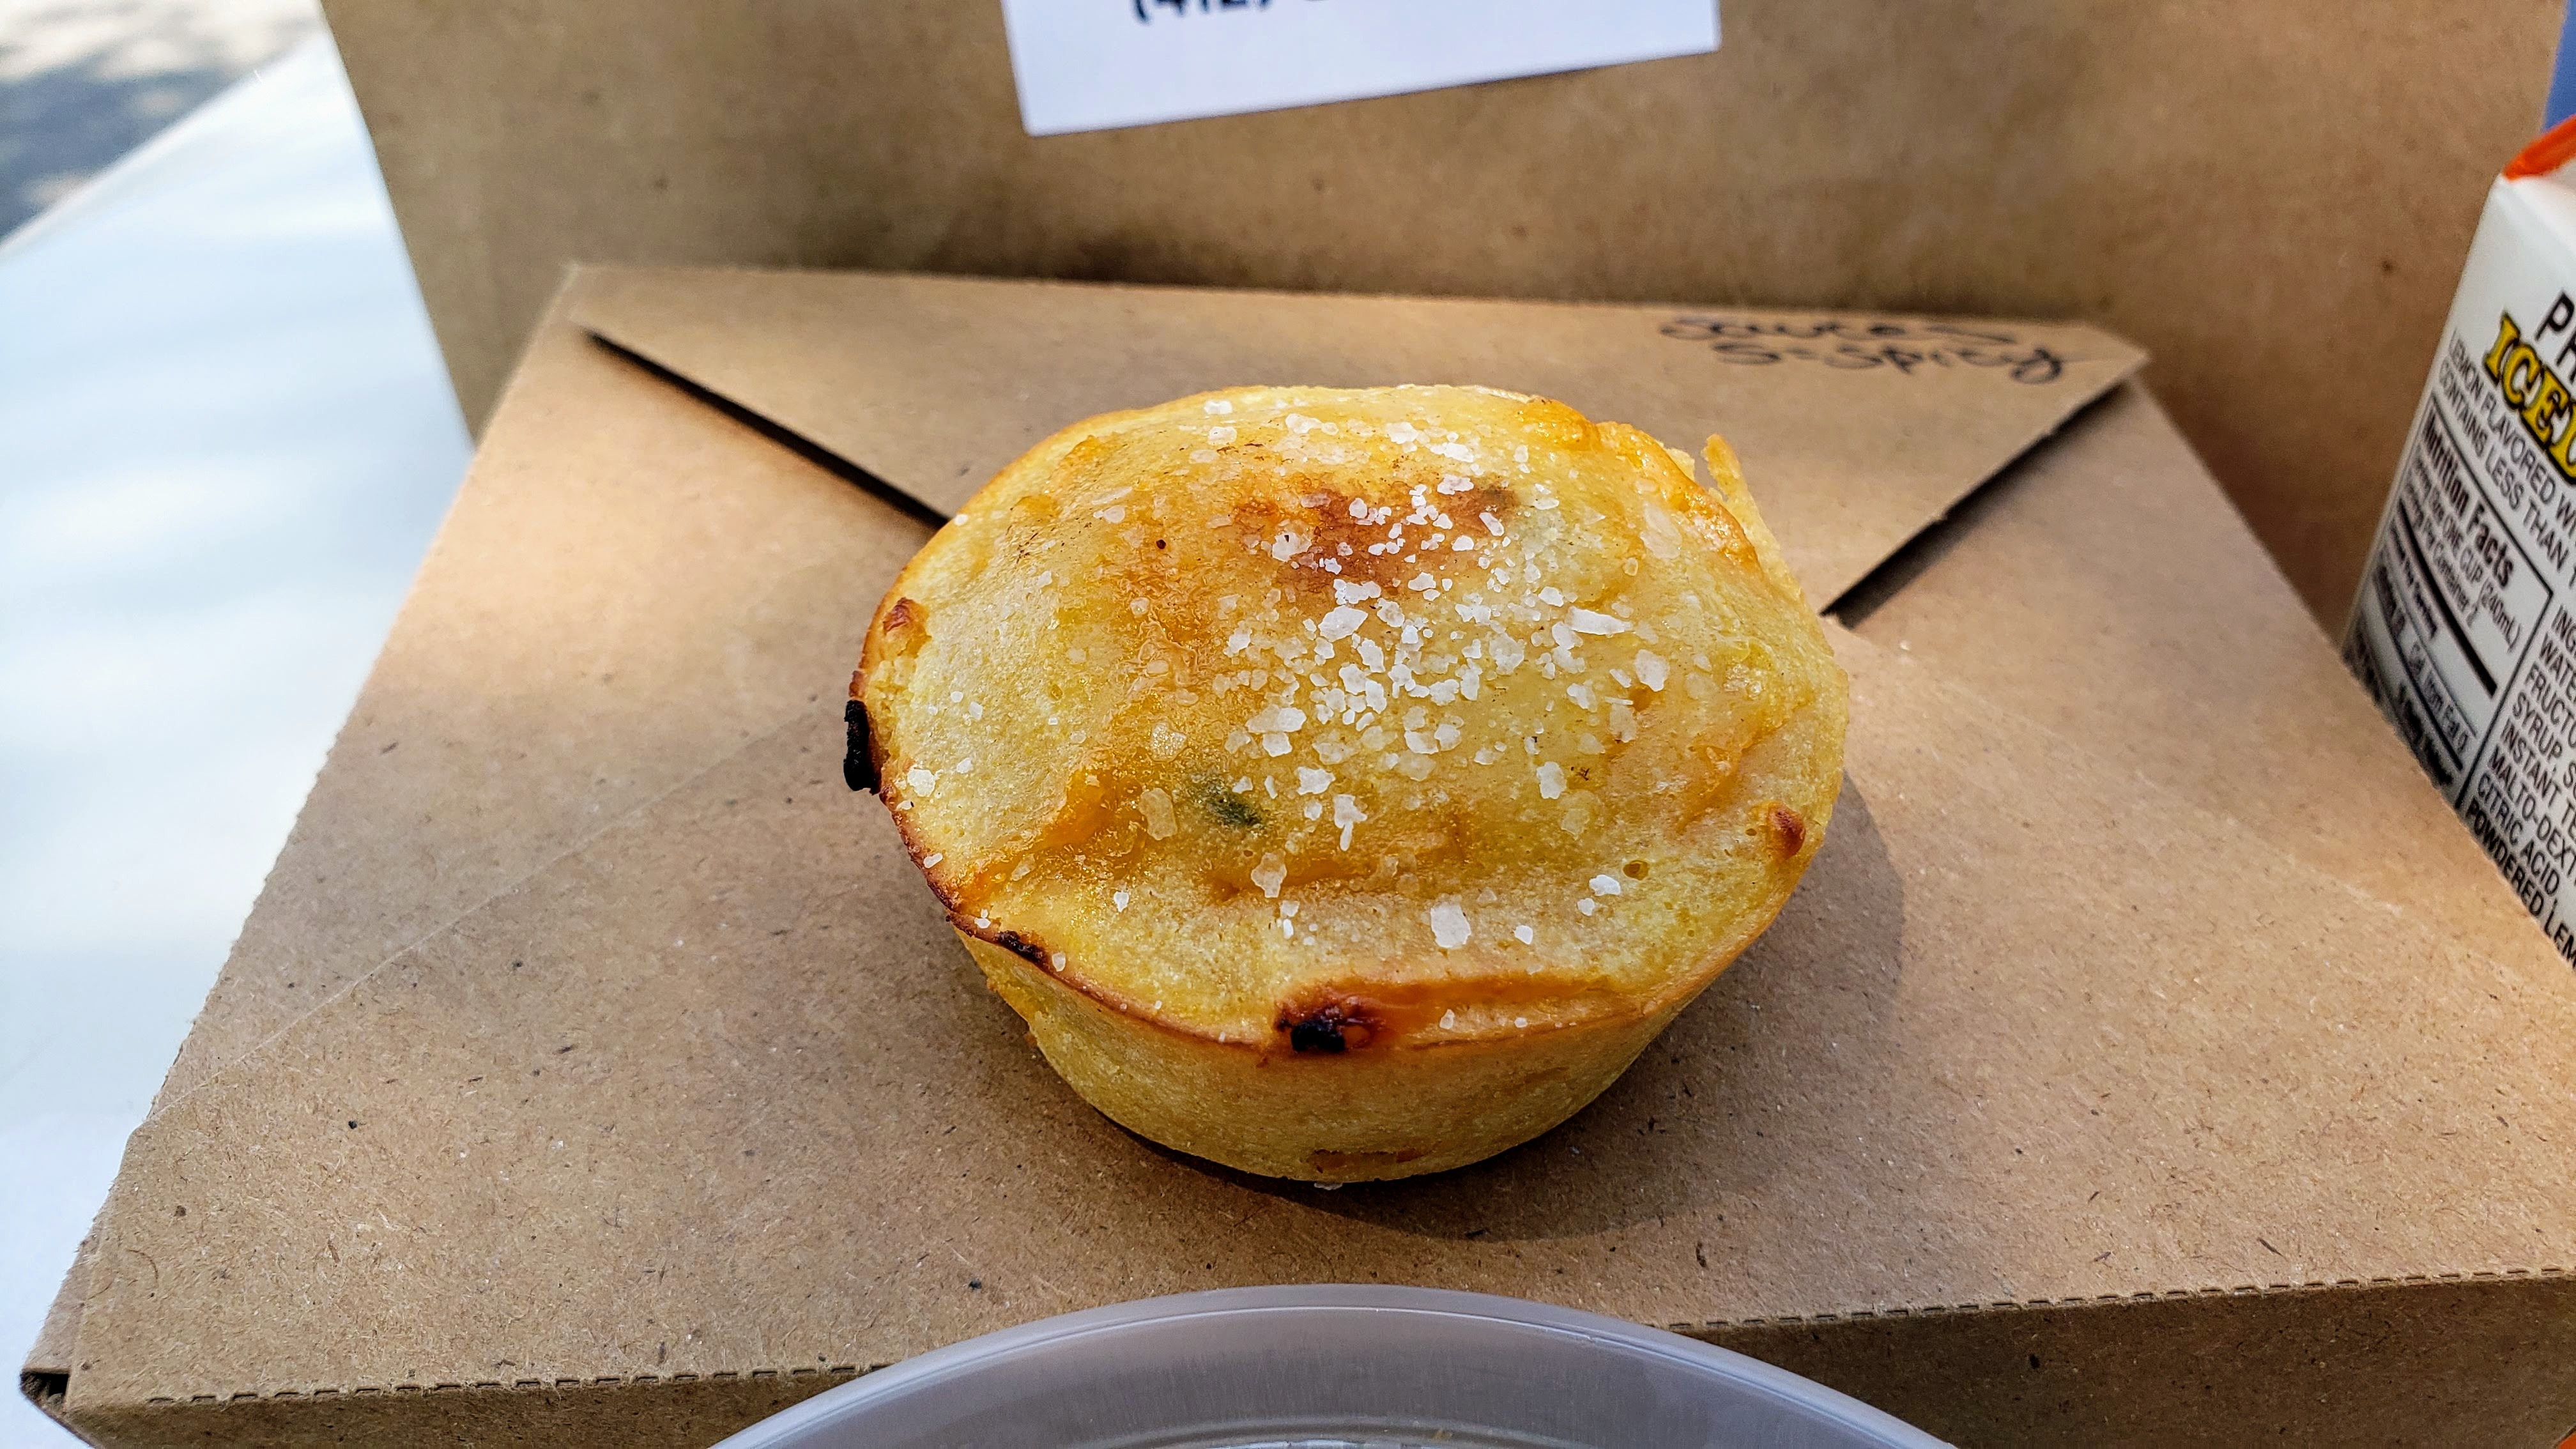 Burk's Barbeque jalapeno cheddar corn muffin